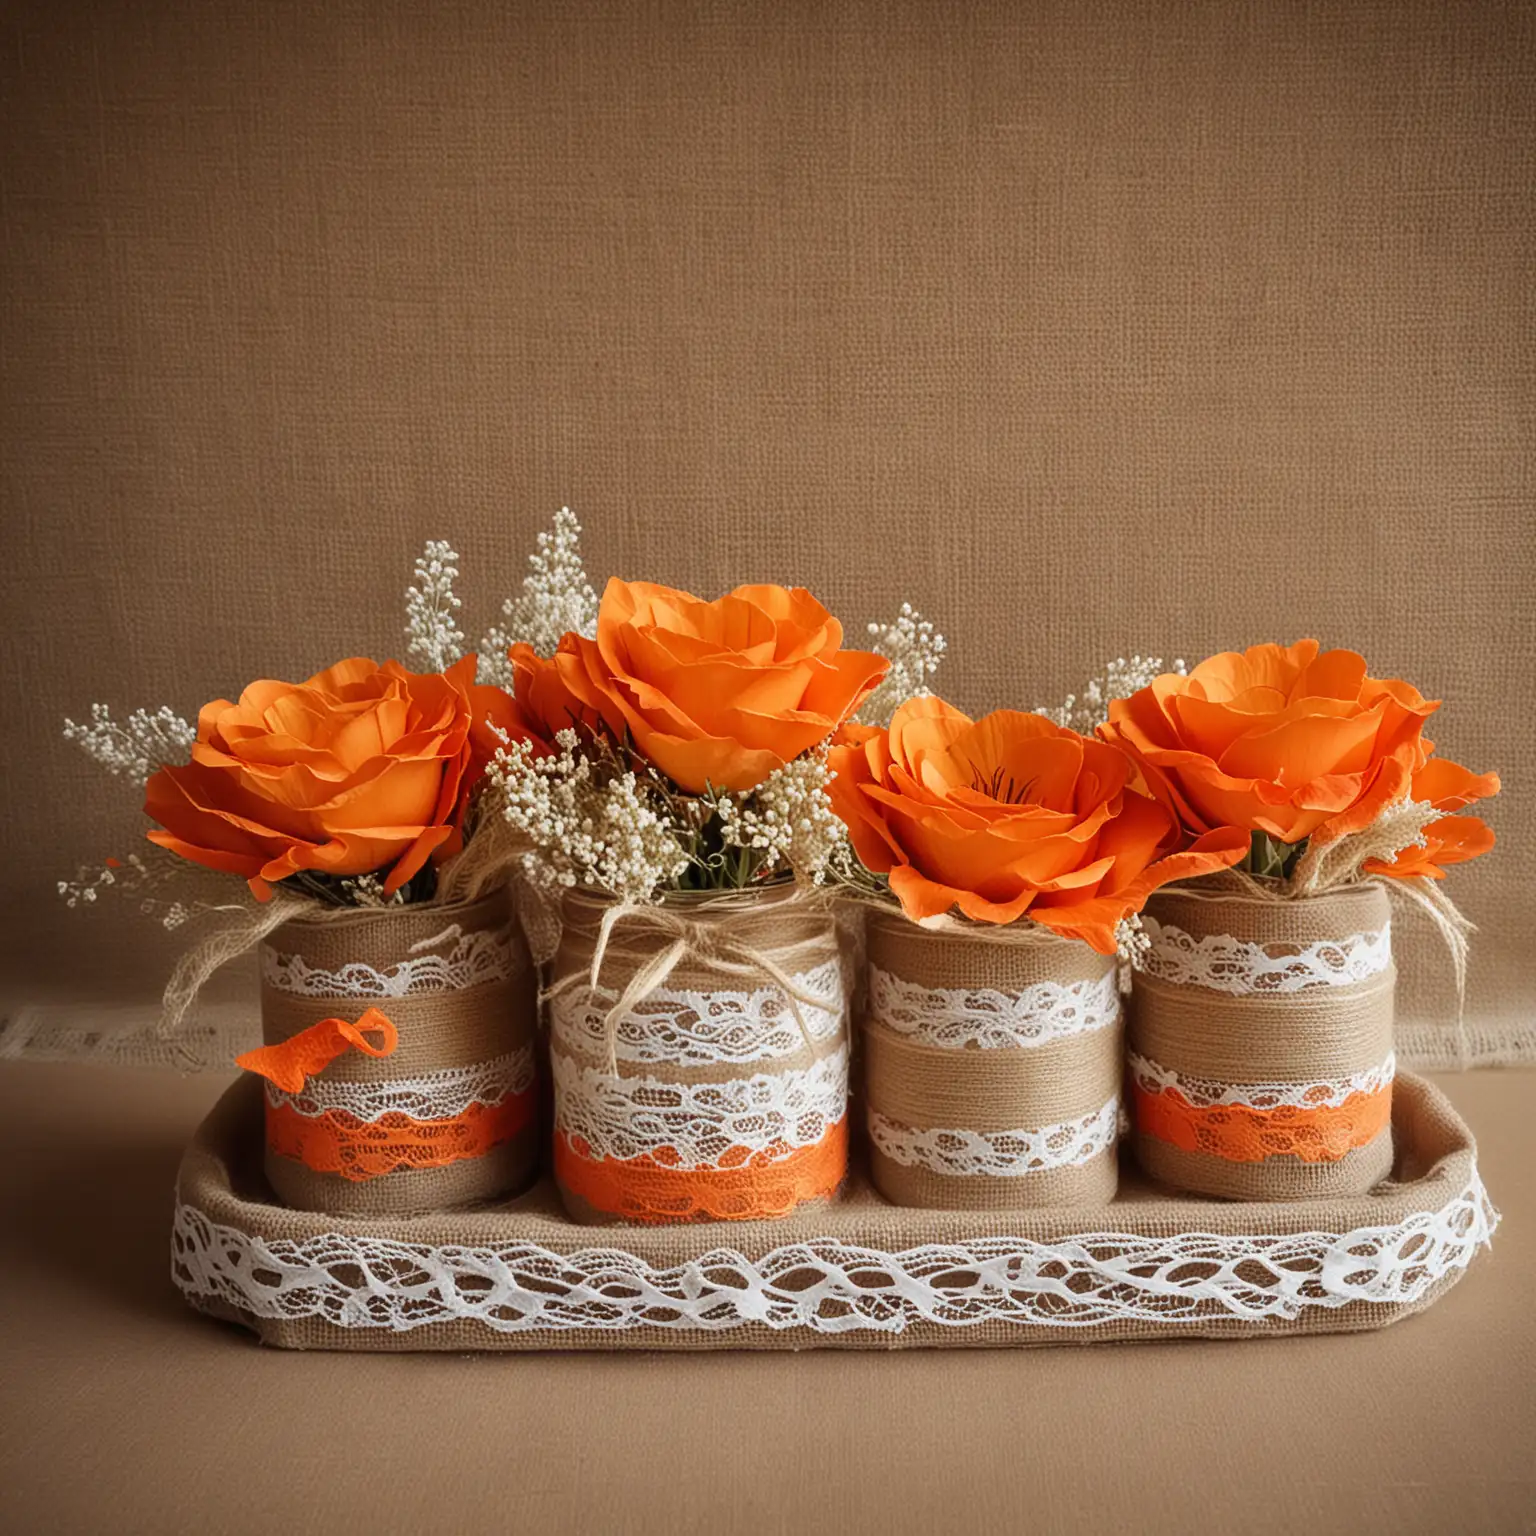 orange rustic wedding centerpiece with burlap and lace; nothing else in photo; keep the background neutral